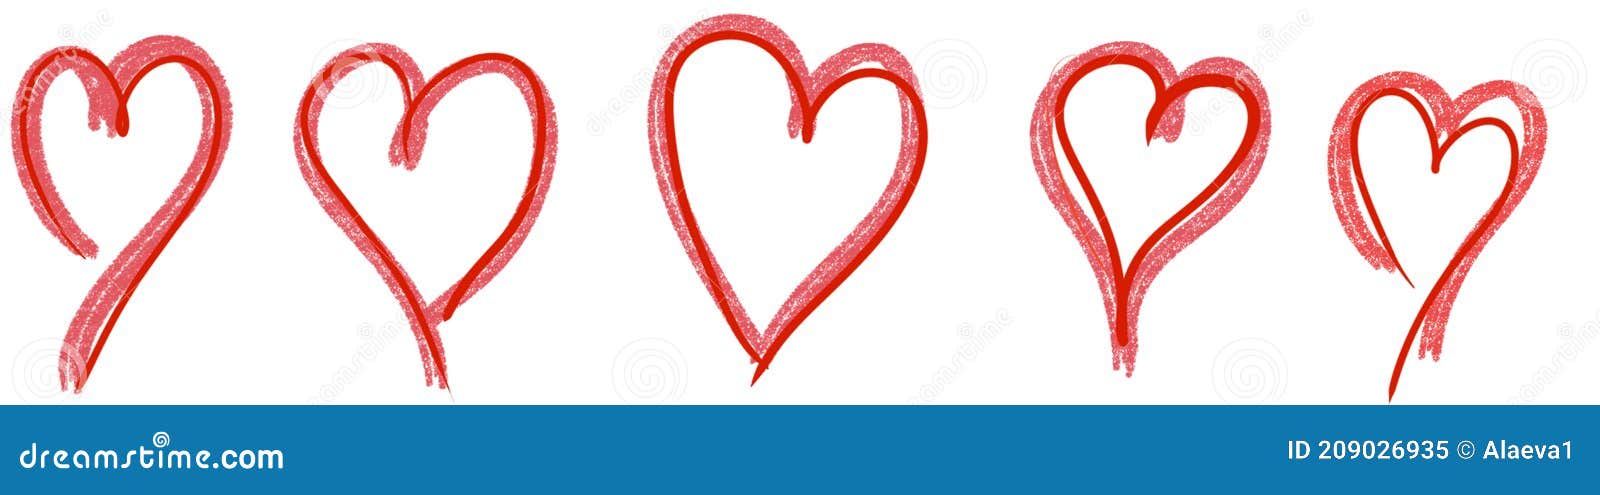 Heart png stock image. Illustration of brand, font, printing - 209026935